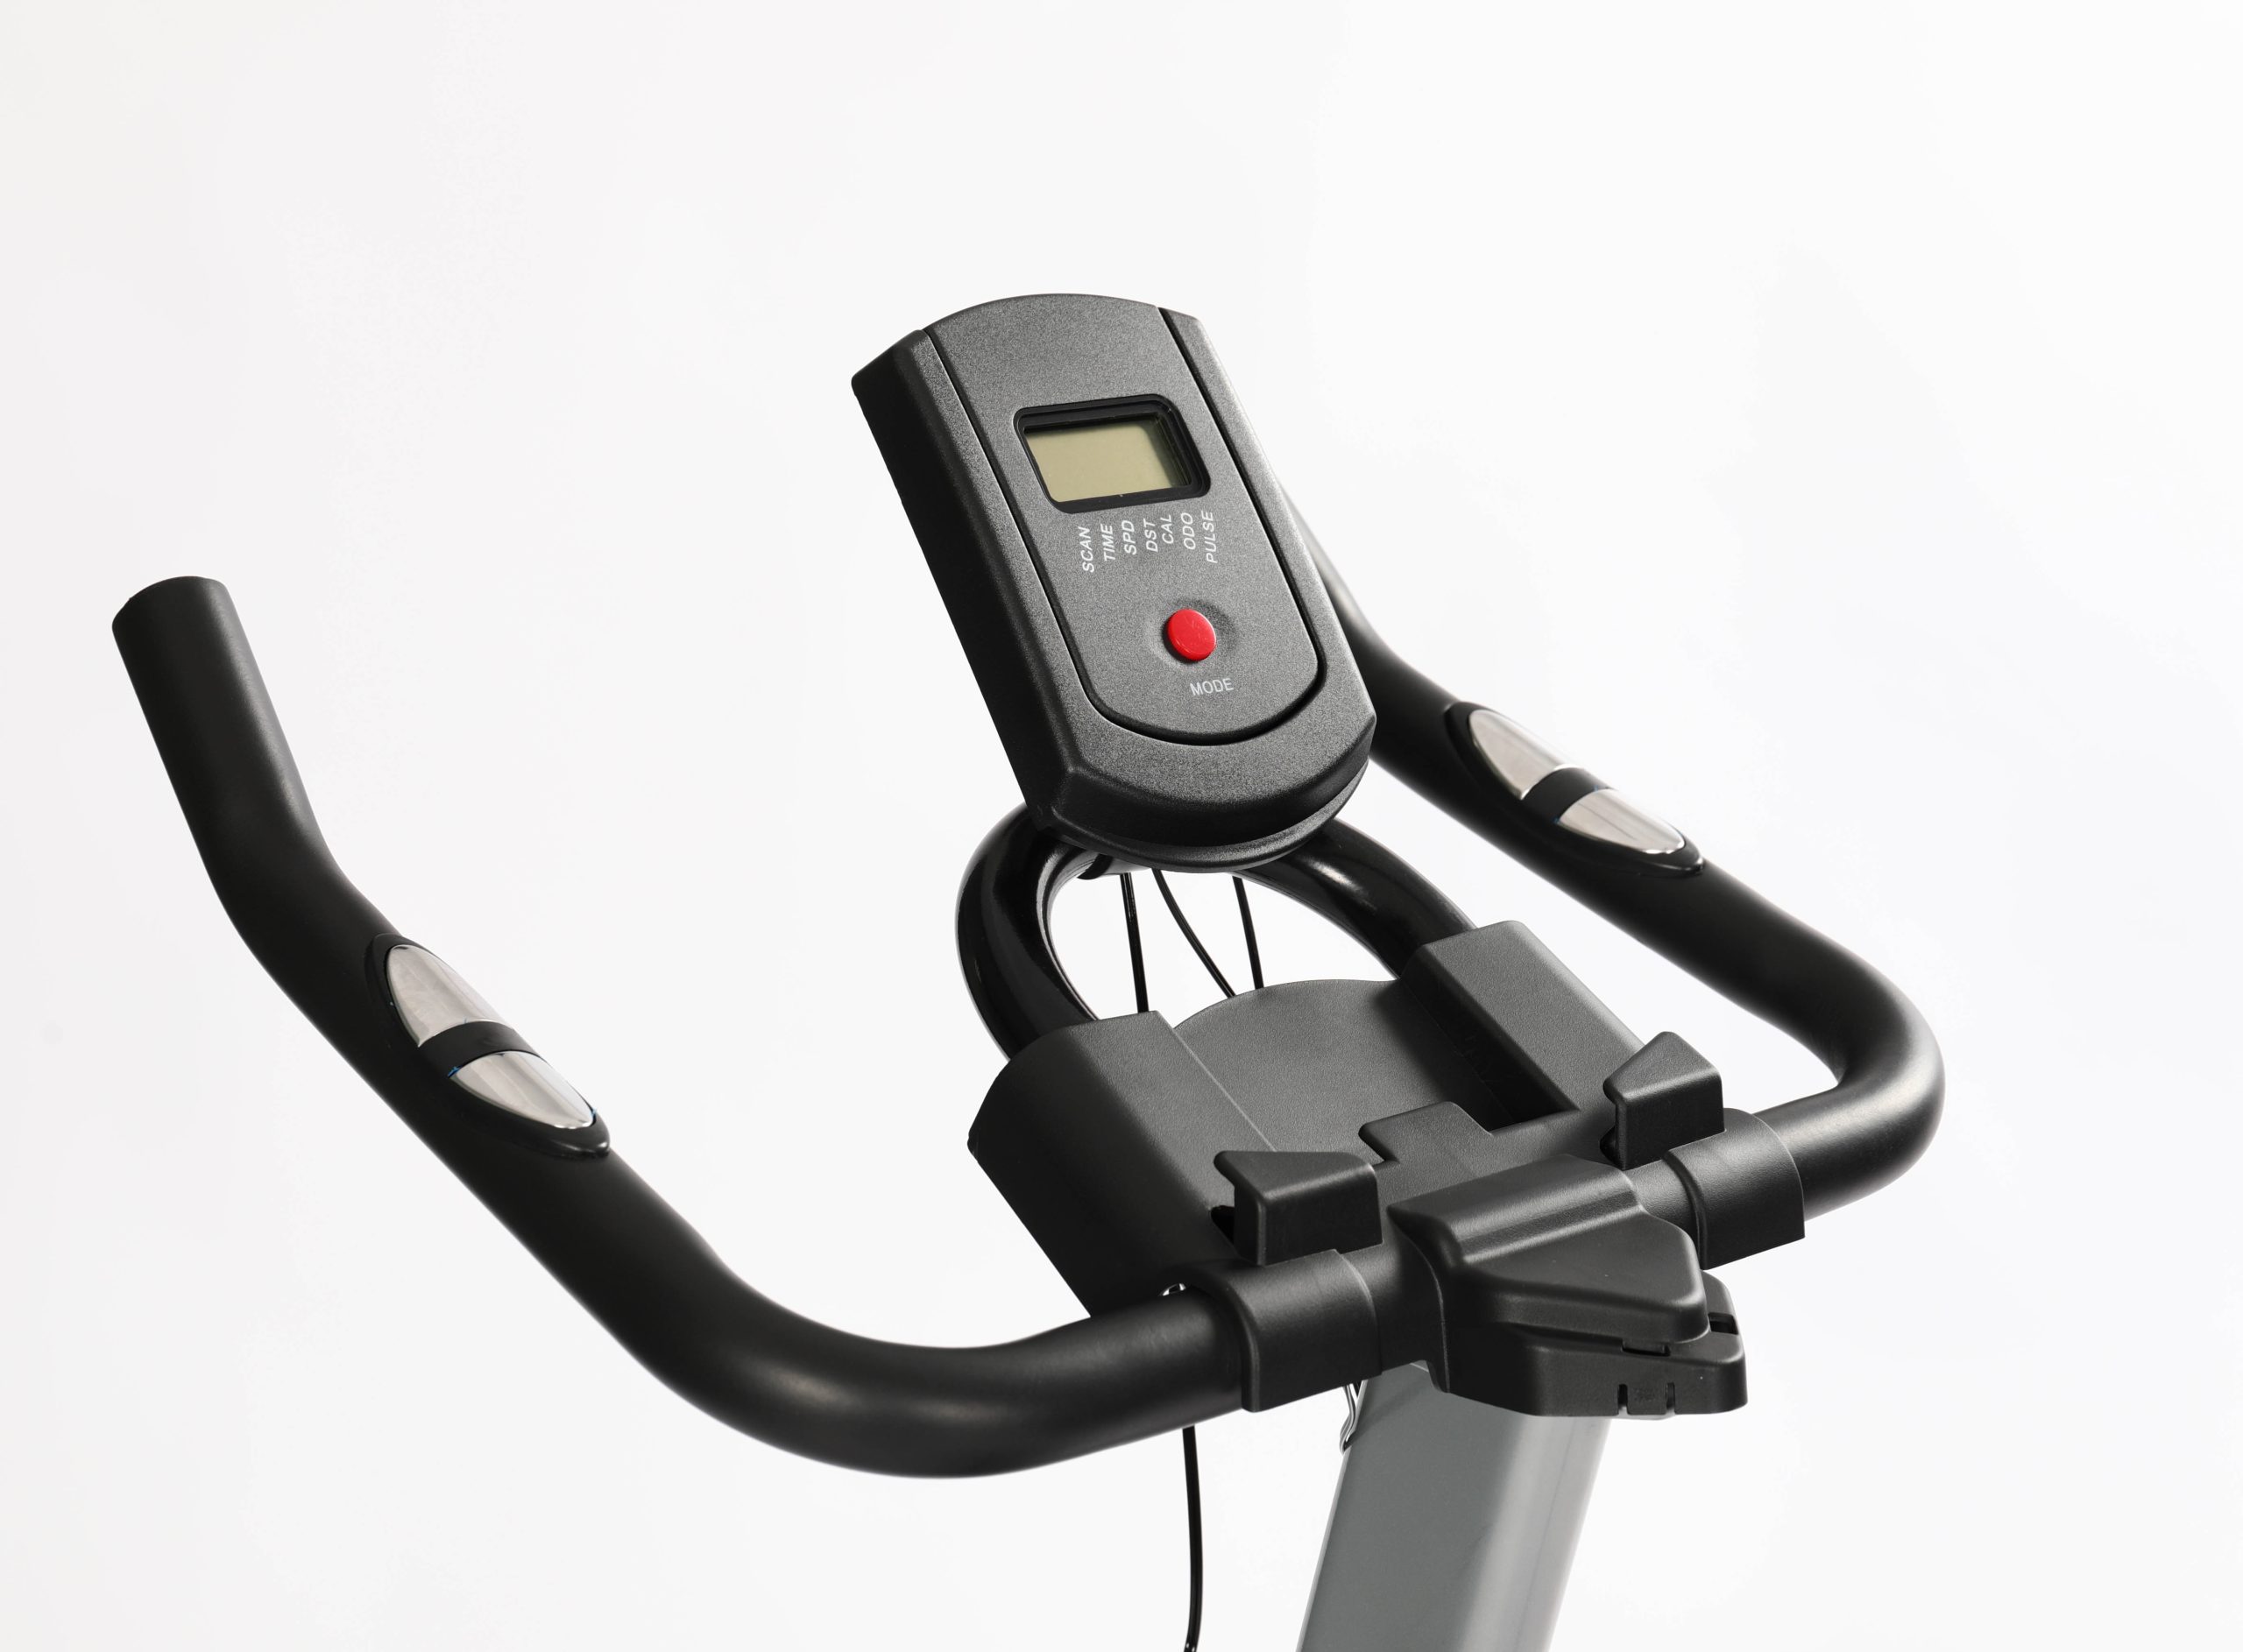 commercial spin bike